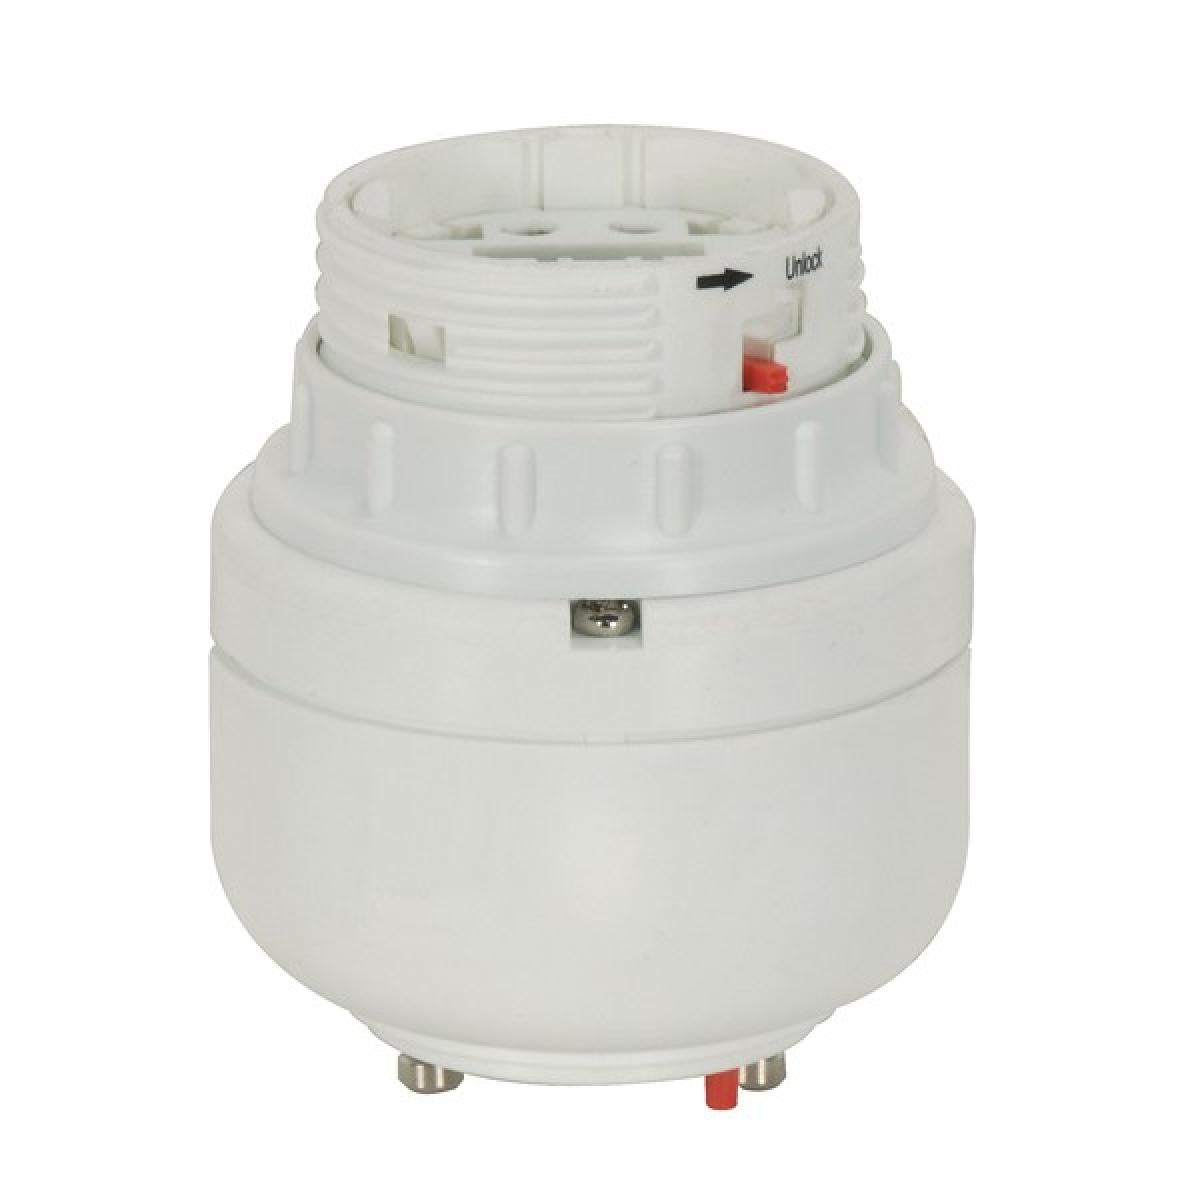 Satco 80-2104 Phenolic Electronic Self-Ballasted CFL Lampholder 120V, 60Hz, 0.34A 42W G24q-4 And GX24q-4 2-3/4" Height 2-1/2" Width